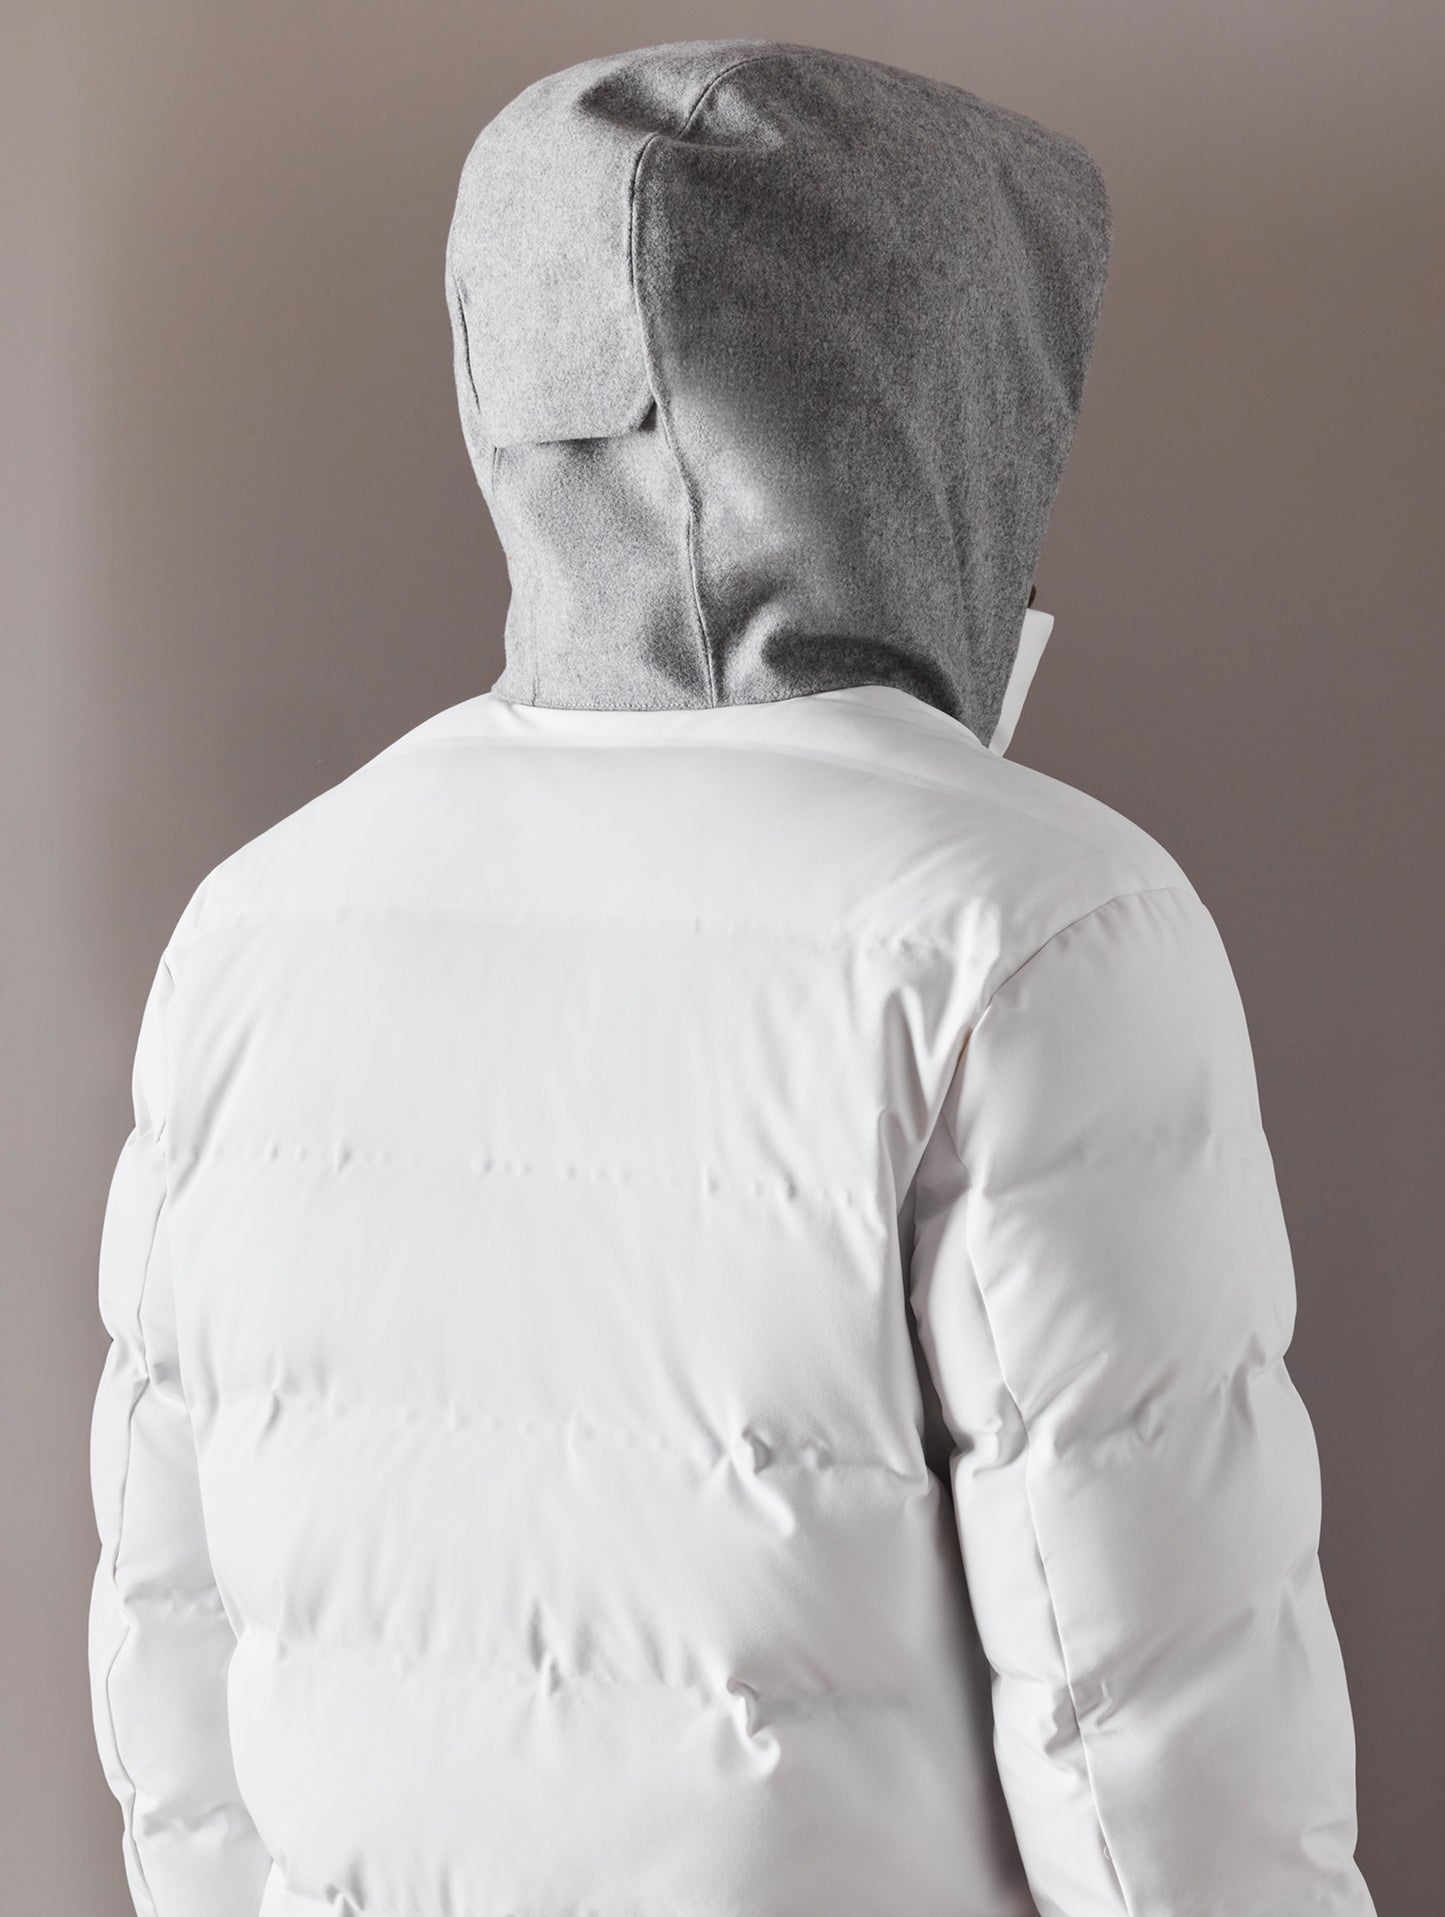 back view of man wearing white ski jacket from AETHER Apparel